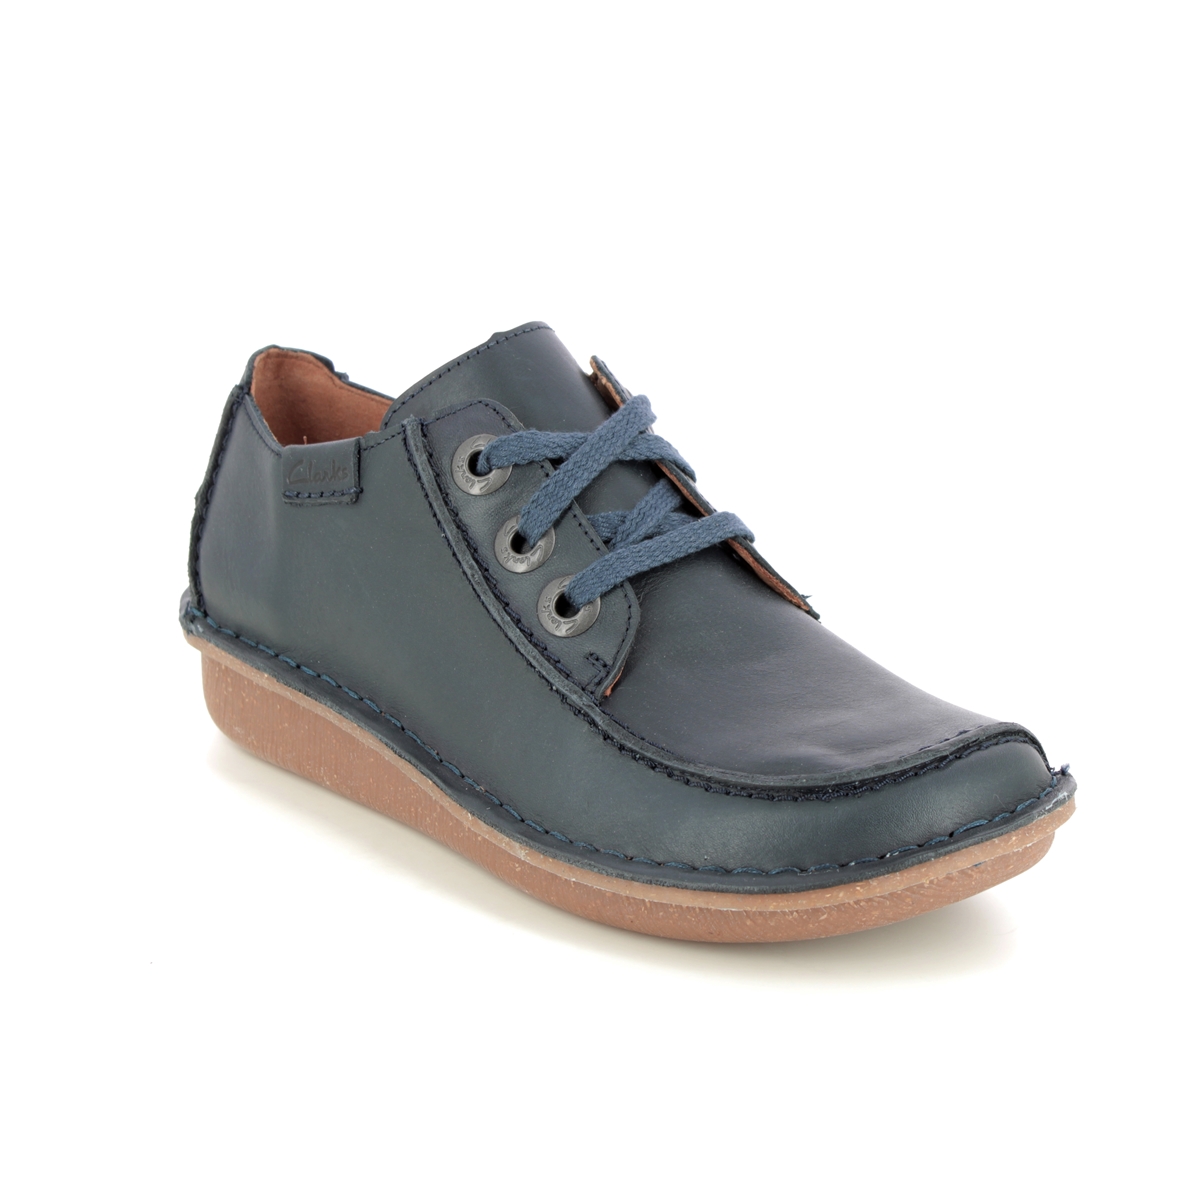 Clarks Funny Dream Navy Leather Womens Lacing Shoes 668184D In Size 5.5 In Plain Navy Leather